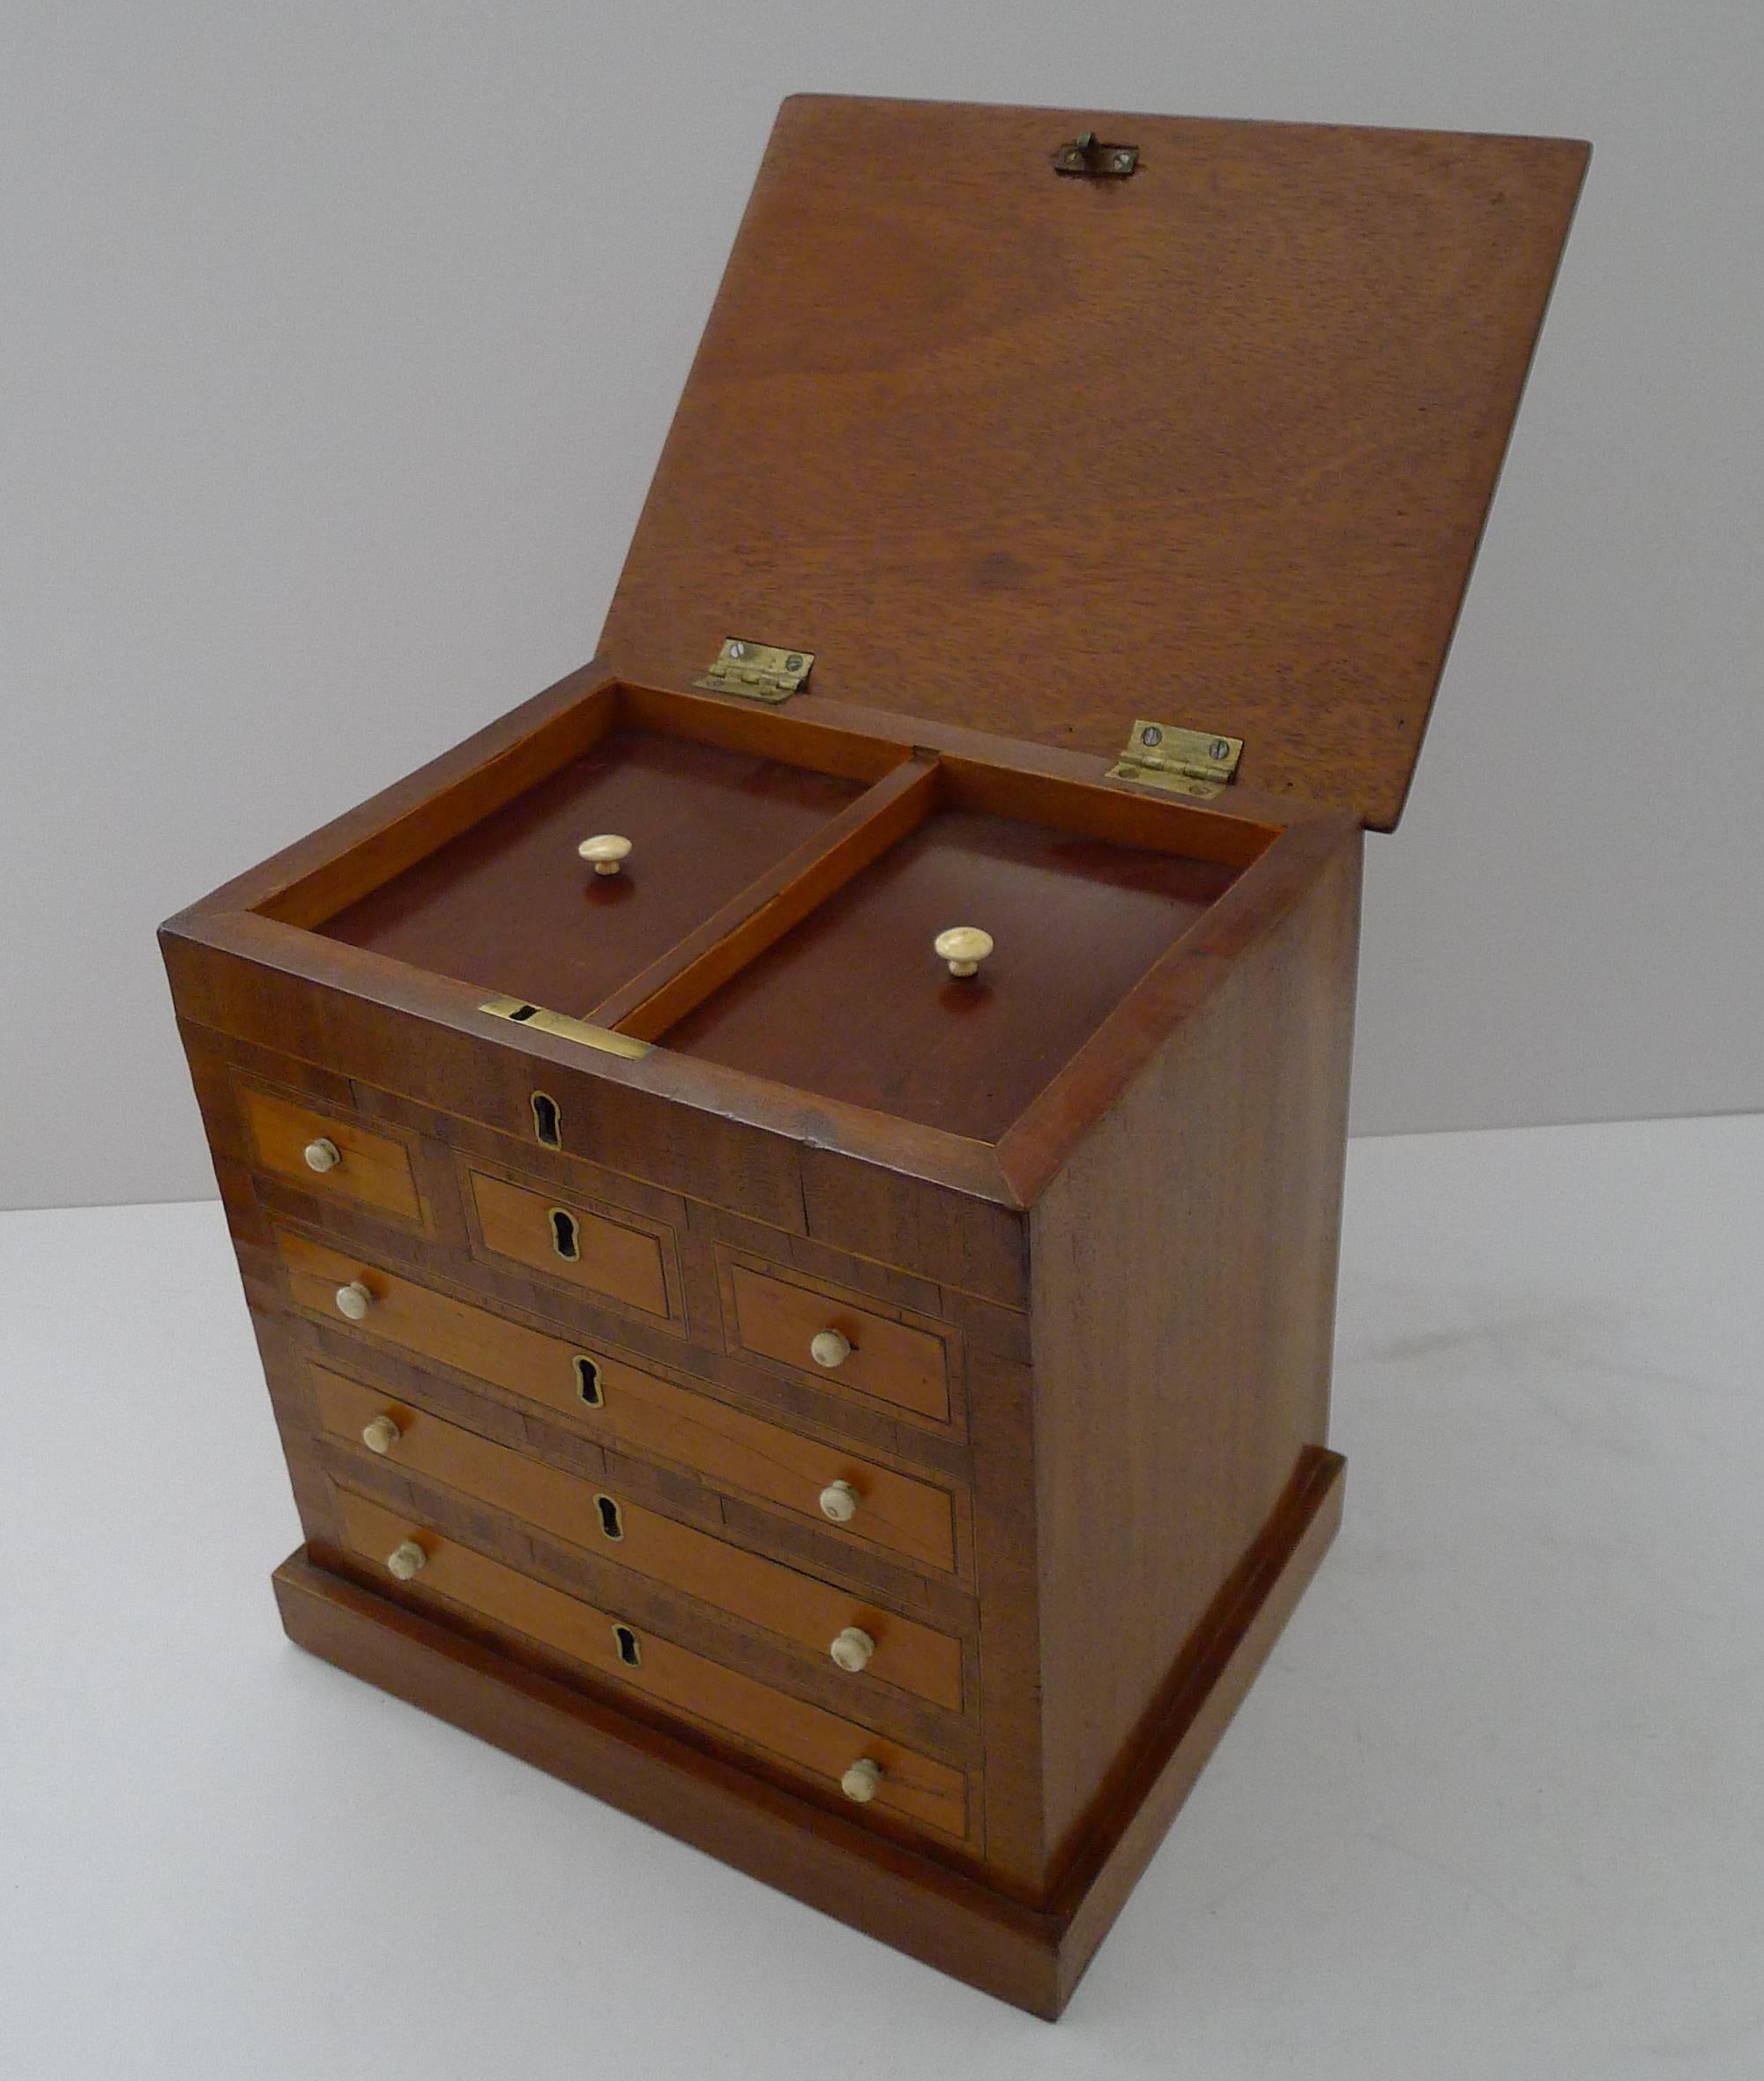 Victorian Rare English Mahogany Tea Caddy - Form of Chest of Drawers c.1880 For Sale